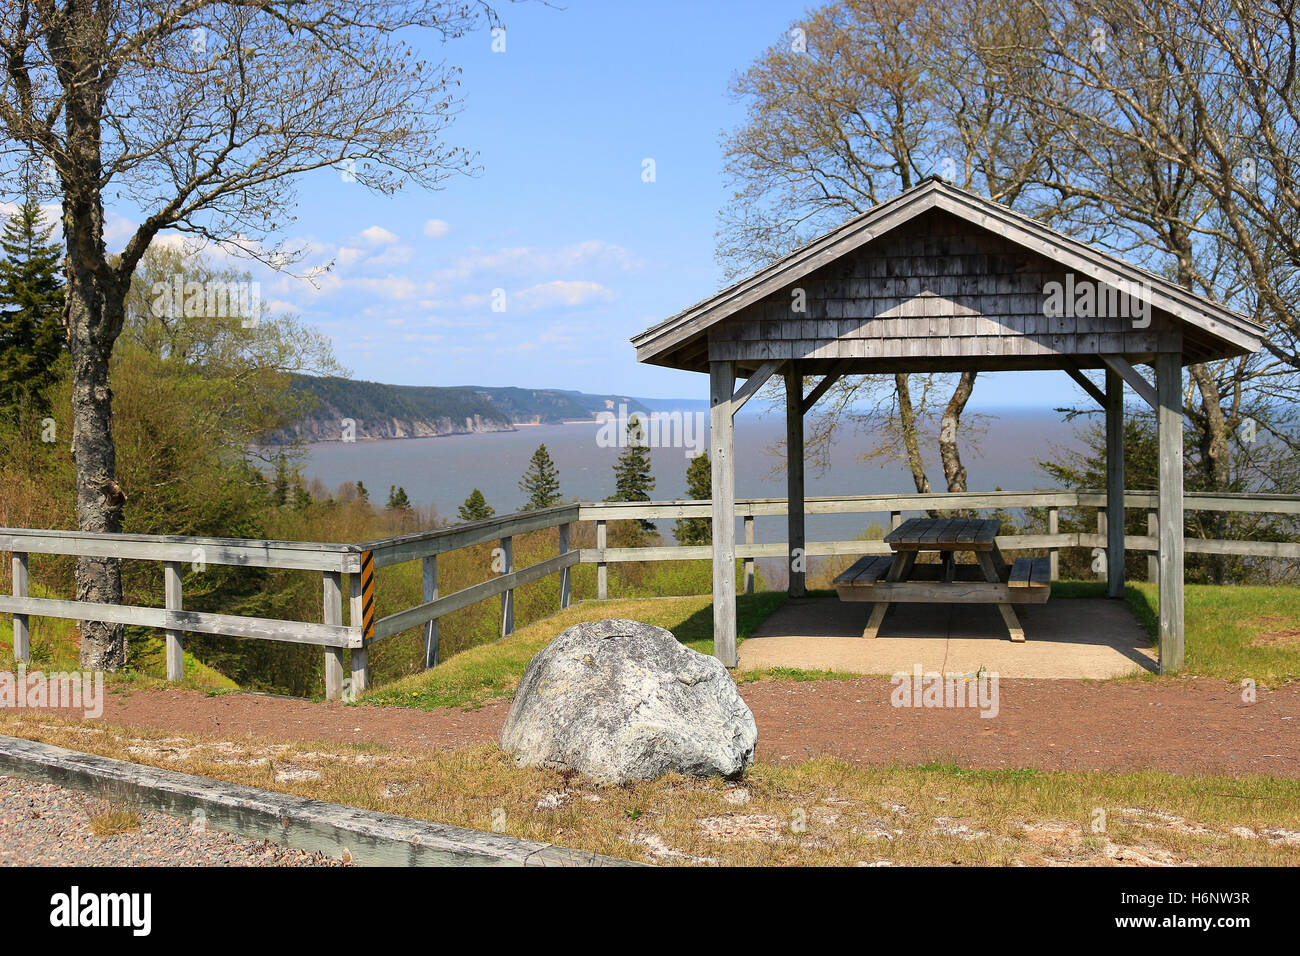 Unspoiled landscape with picnic table overlooking the Bay of Fundy on the Fundy Trail Parkway in New Brunswick, Canada Stock Photo